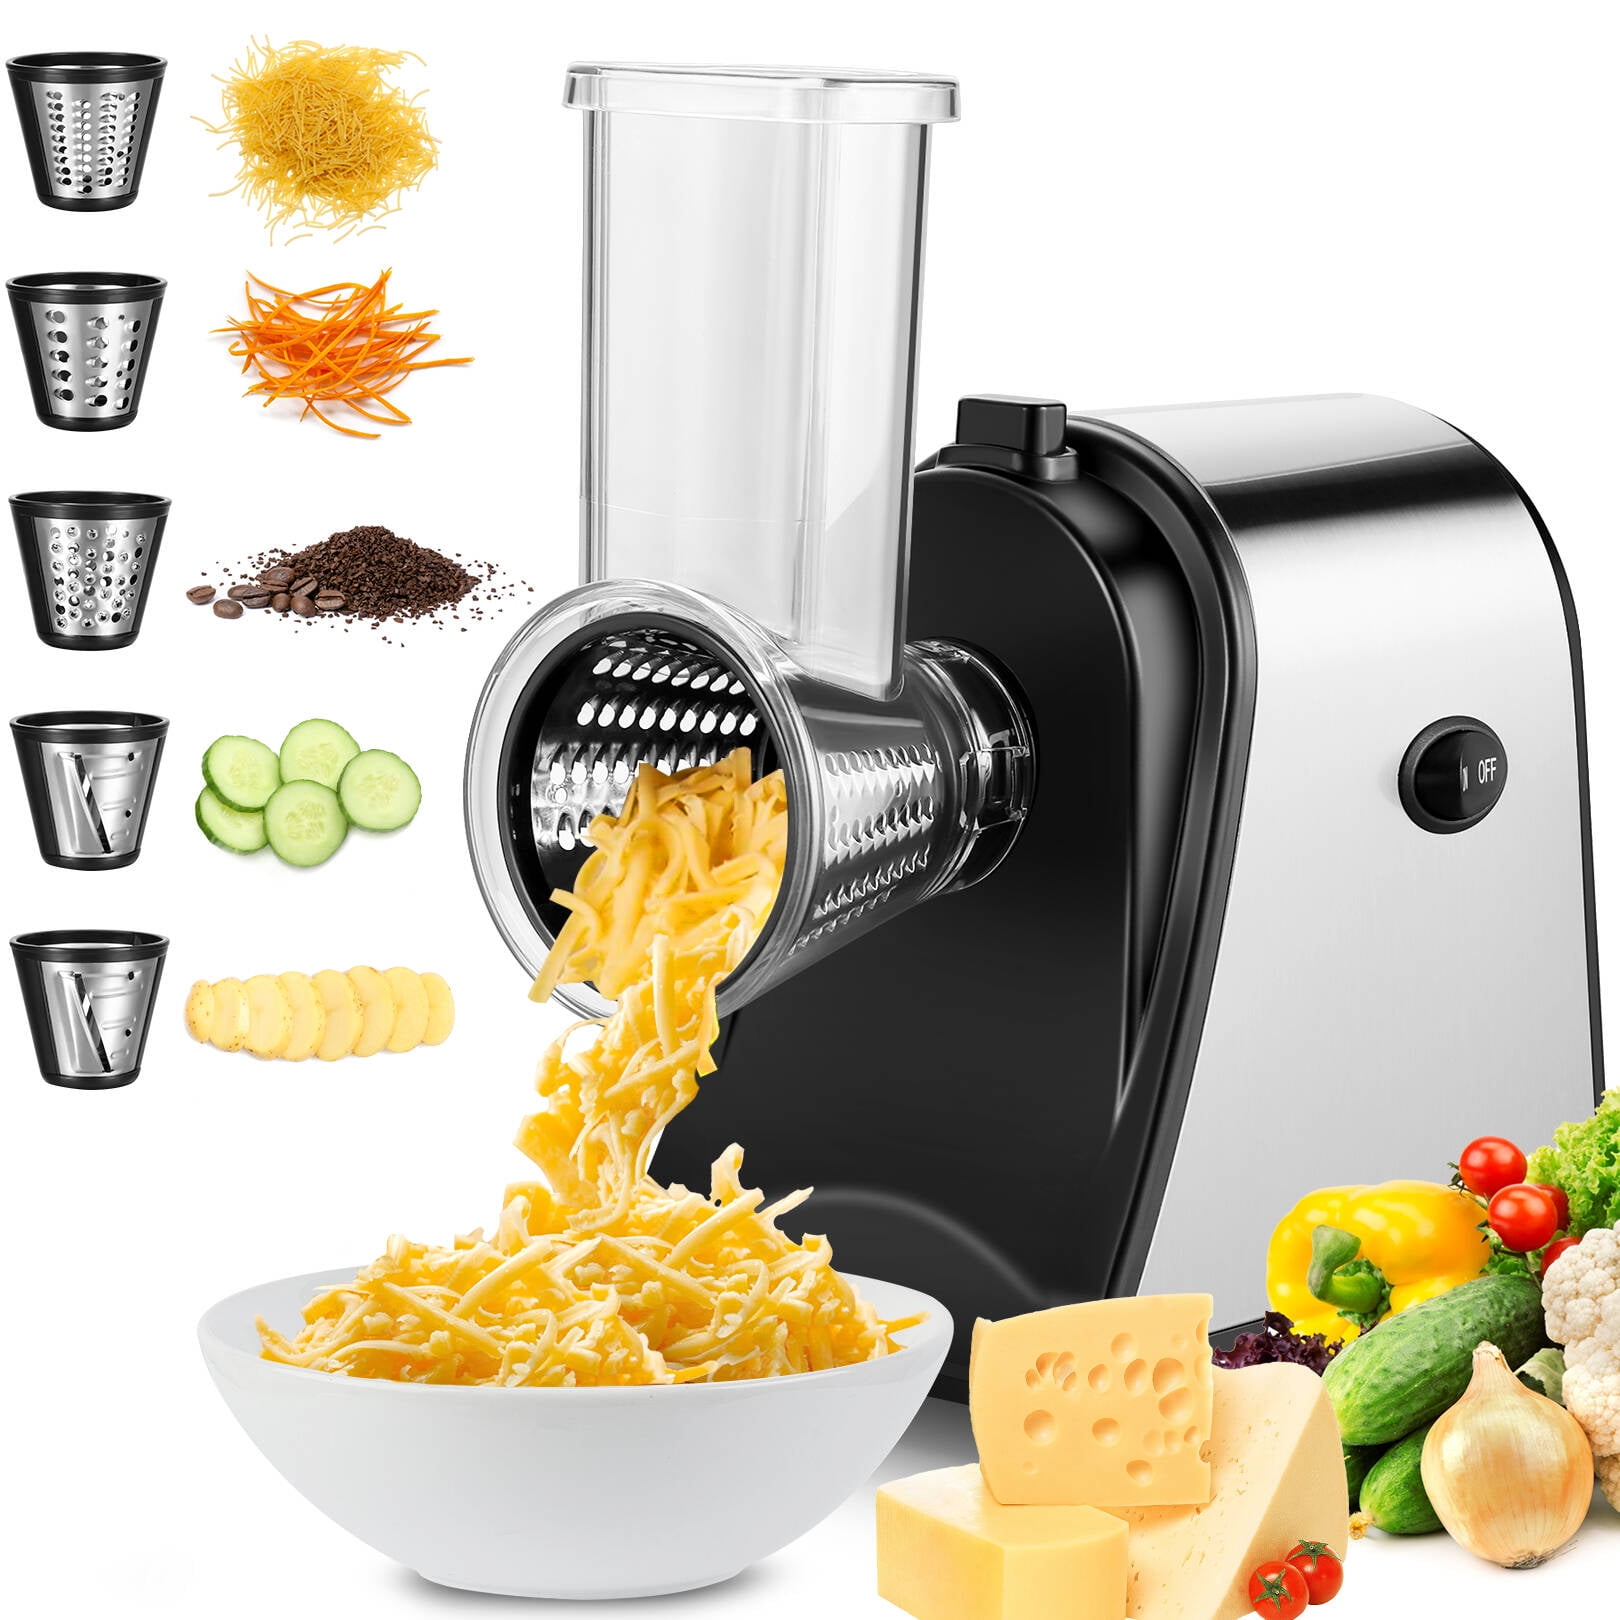 EYAS LAN Cheese grater electric, 250W Professional Electric Cheese Grater, Automatic Electric Grater for for Fruits, Cheeses,block,Vegetables with 5  Free Attachments, Black&Red, Upgraded in 2023 